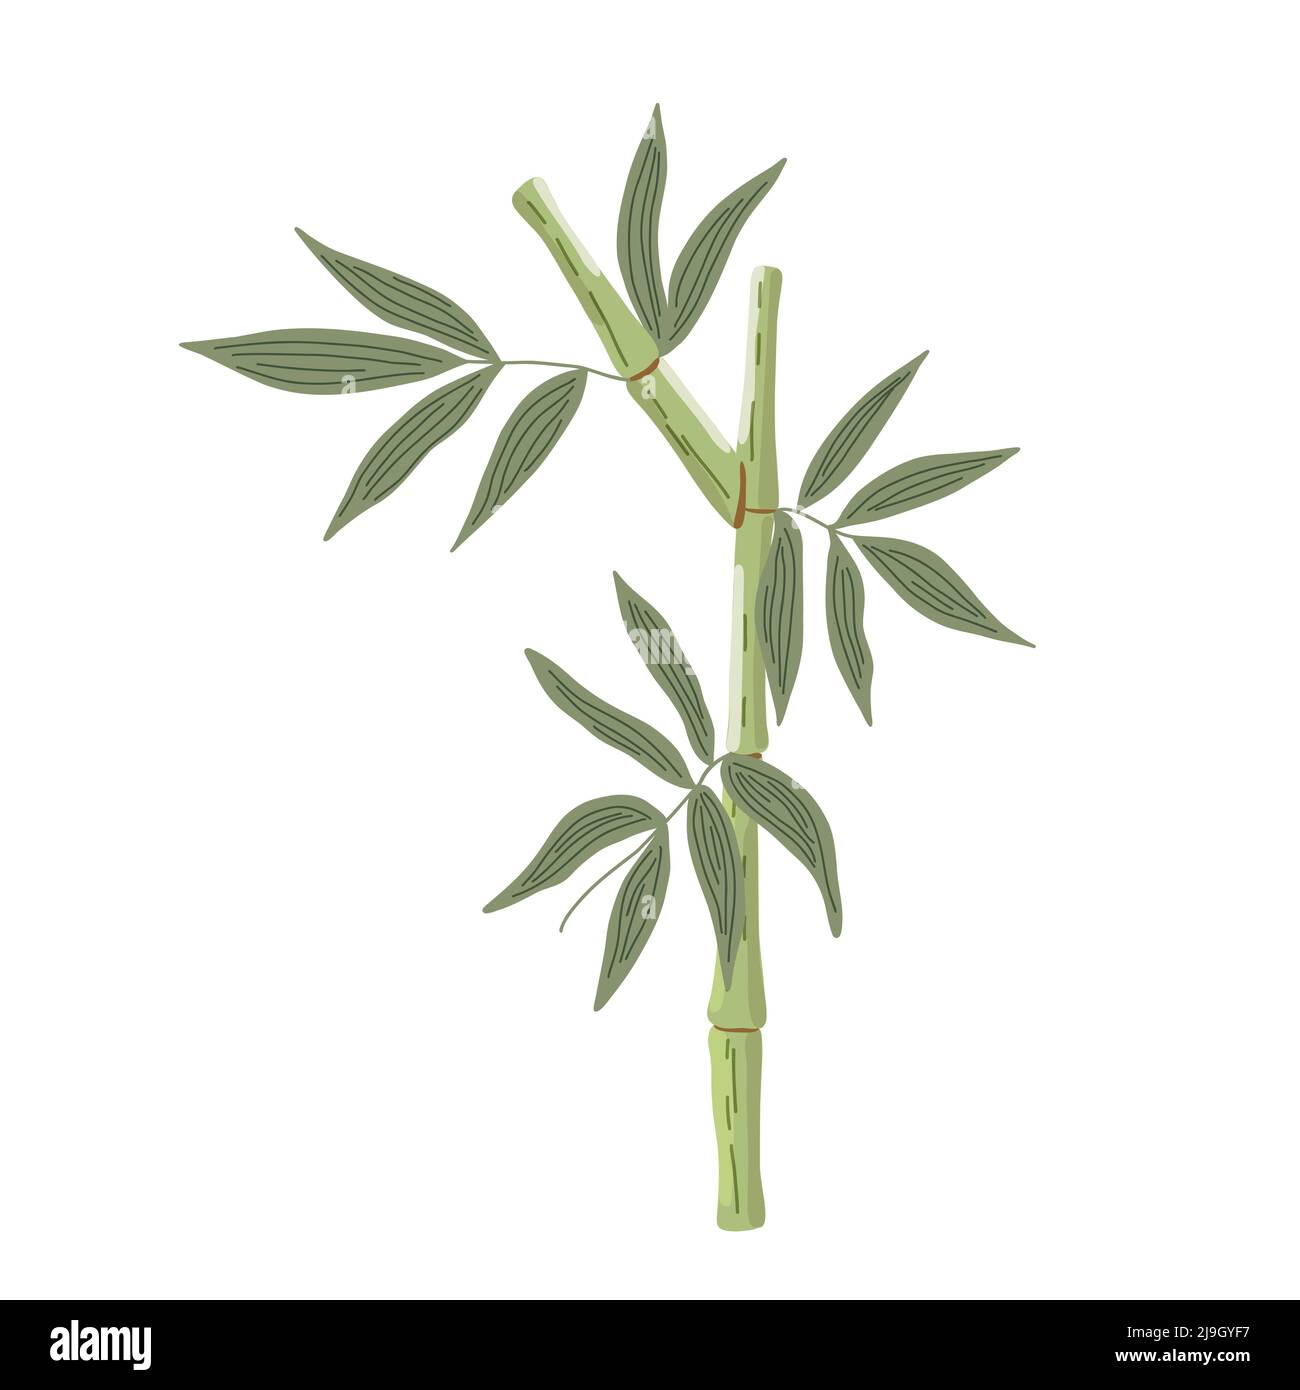 Bamboo leaves simple flat style vector illustration, traditional japanese plant, oriental decorative ornament for design, greeting card, template, banner, zen concept Stock Vector